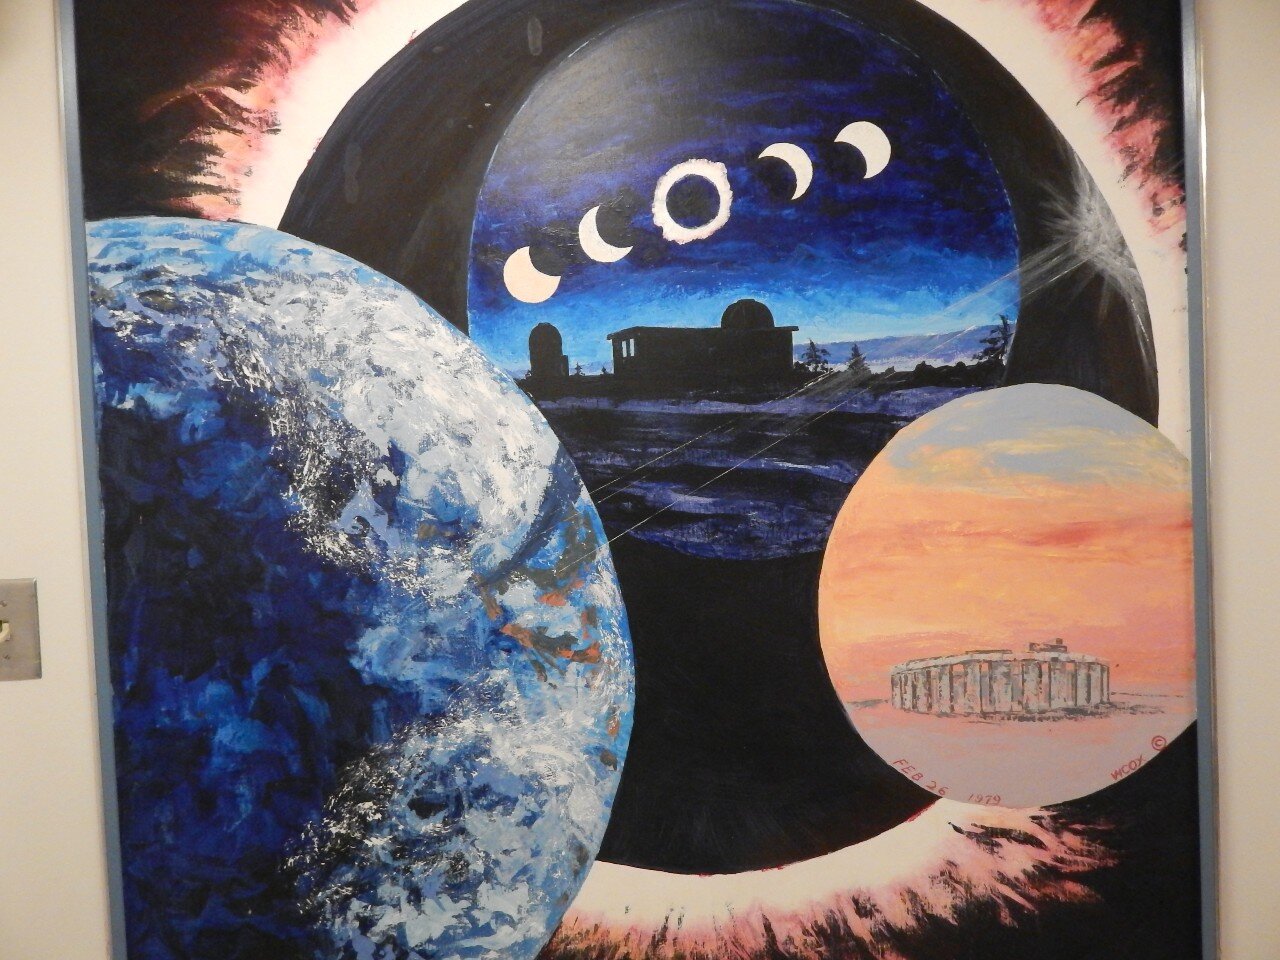  Artwork on the GOSP wall depicting the Total Eclipse of the Sun and referencing the Maryhill Stonehenge WWI Memorial nearby, by Dee Caputo 